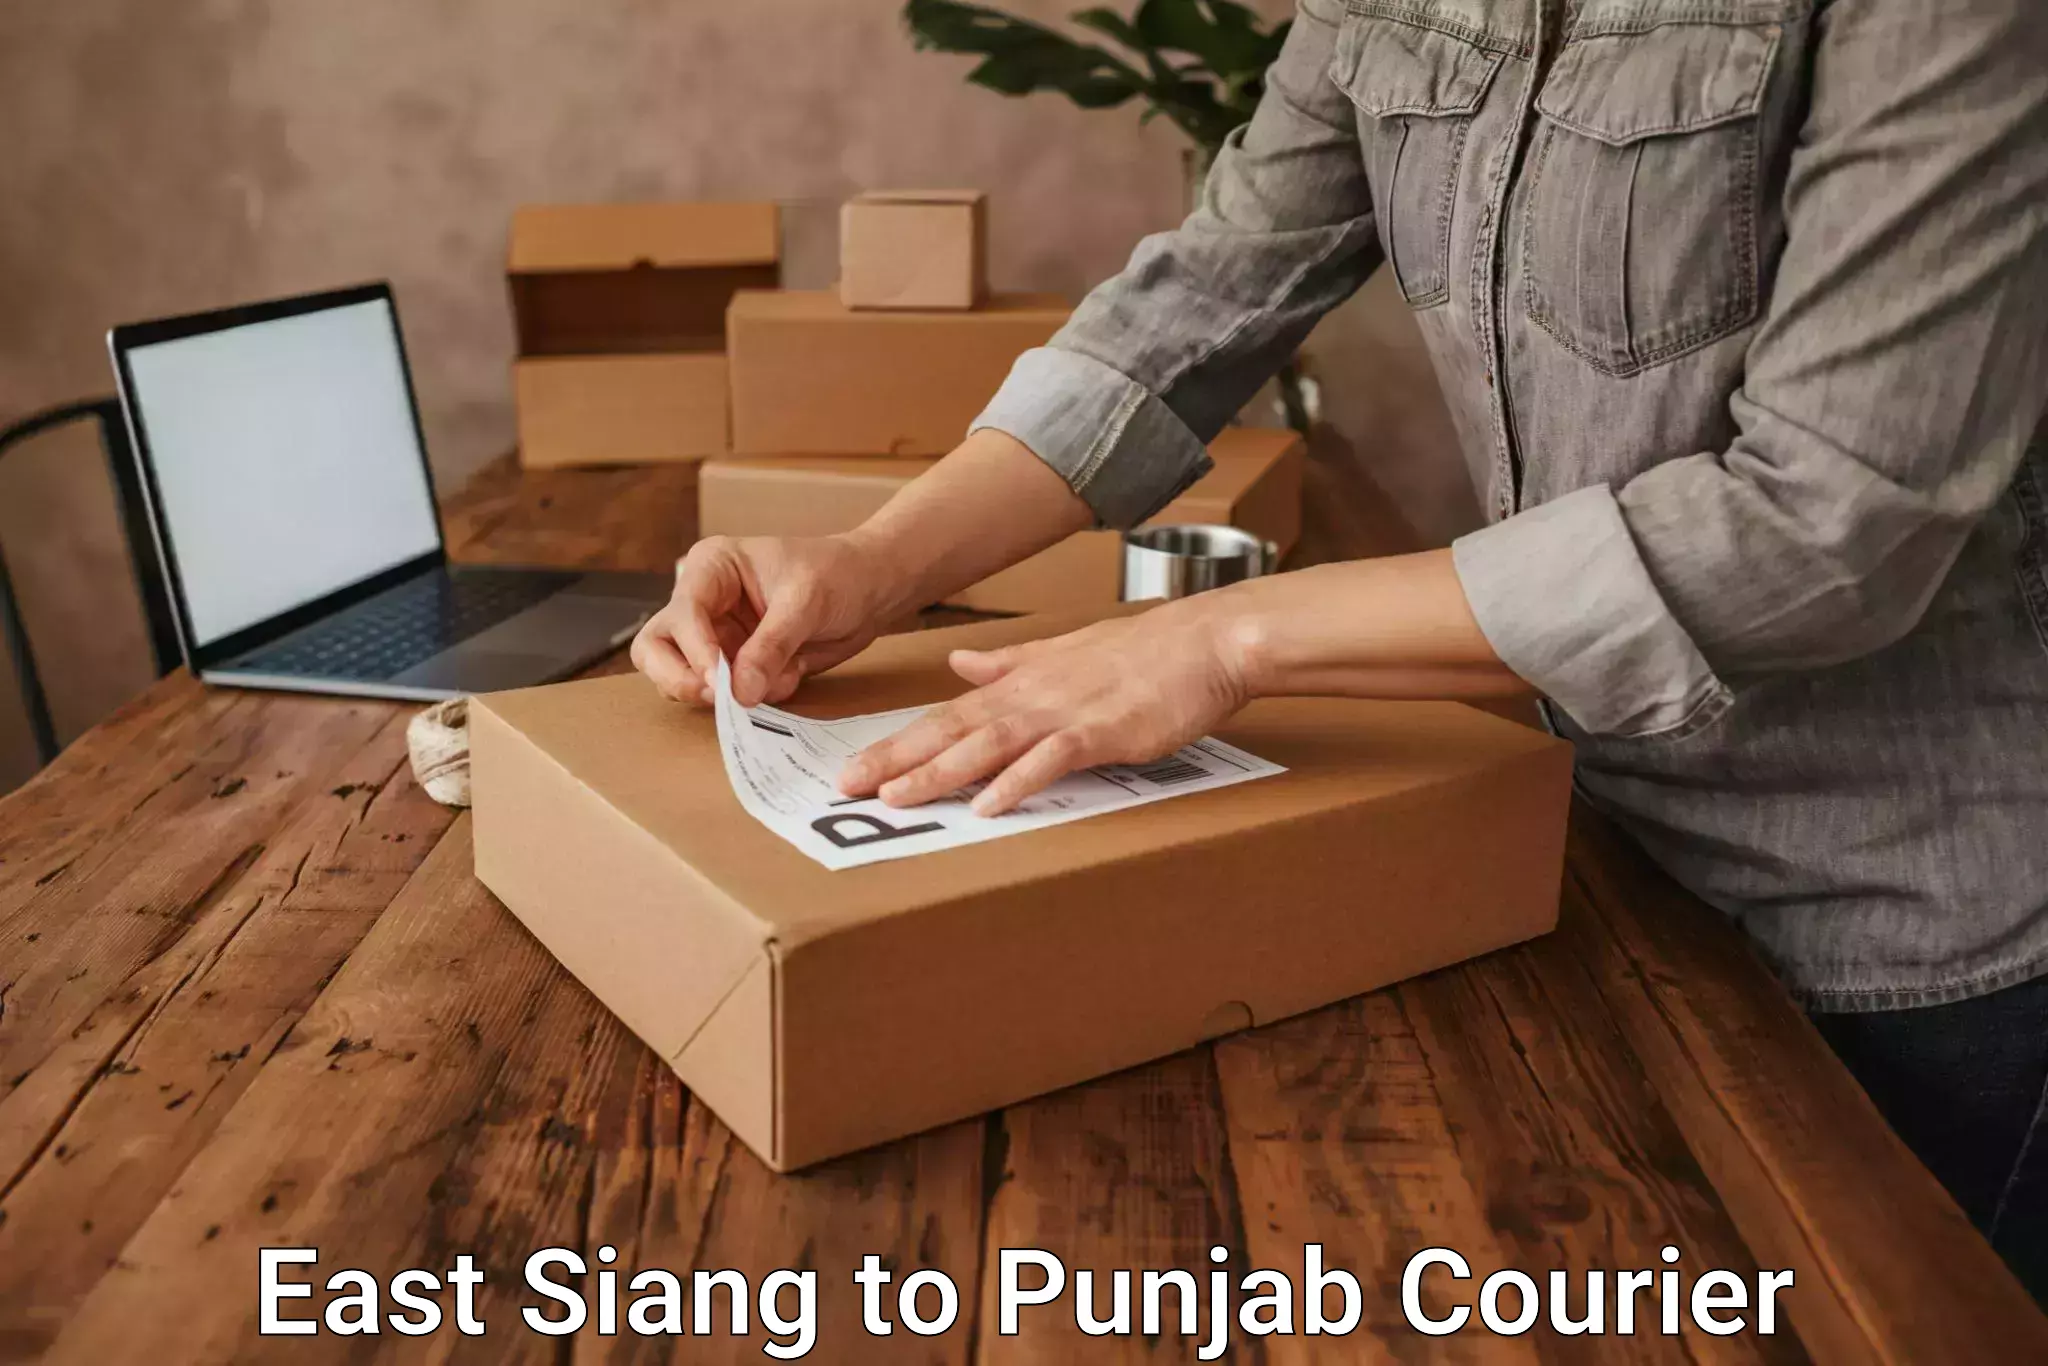 Advanced courier platforms East Siang to Central University of Punjab Bathinda